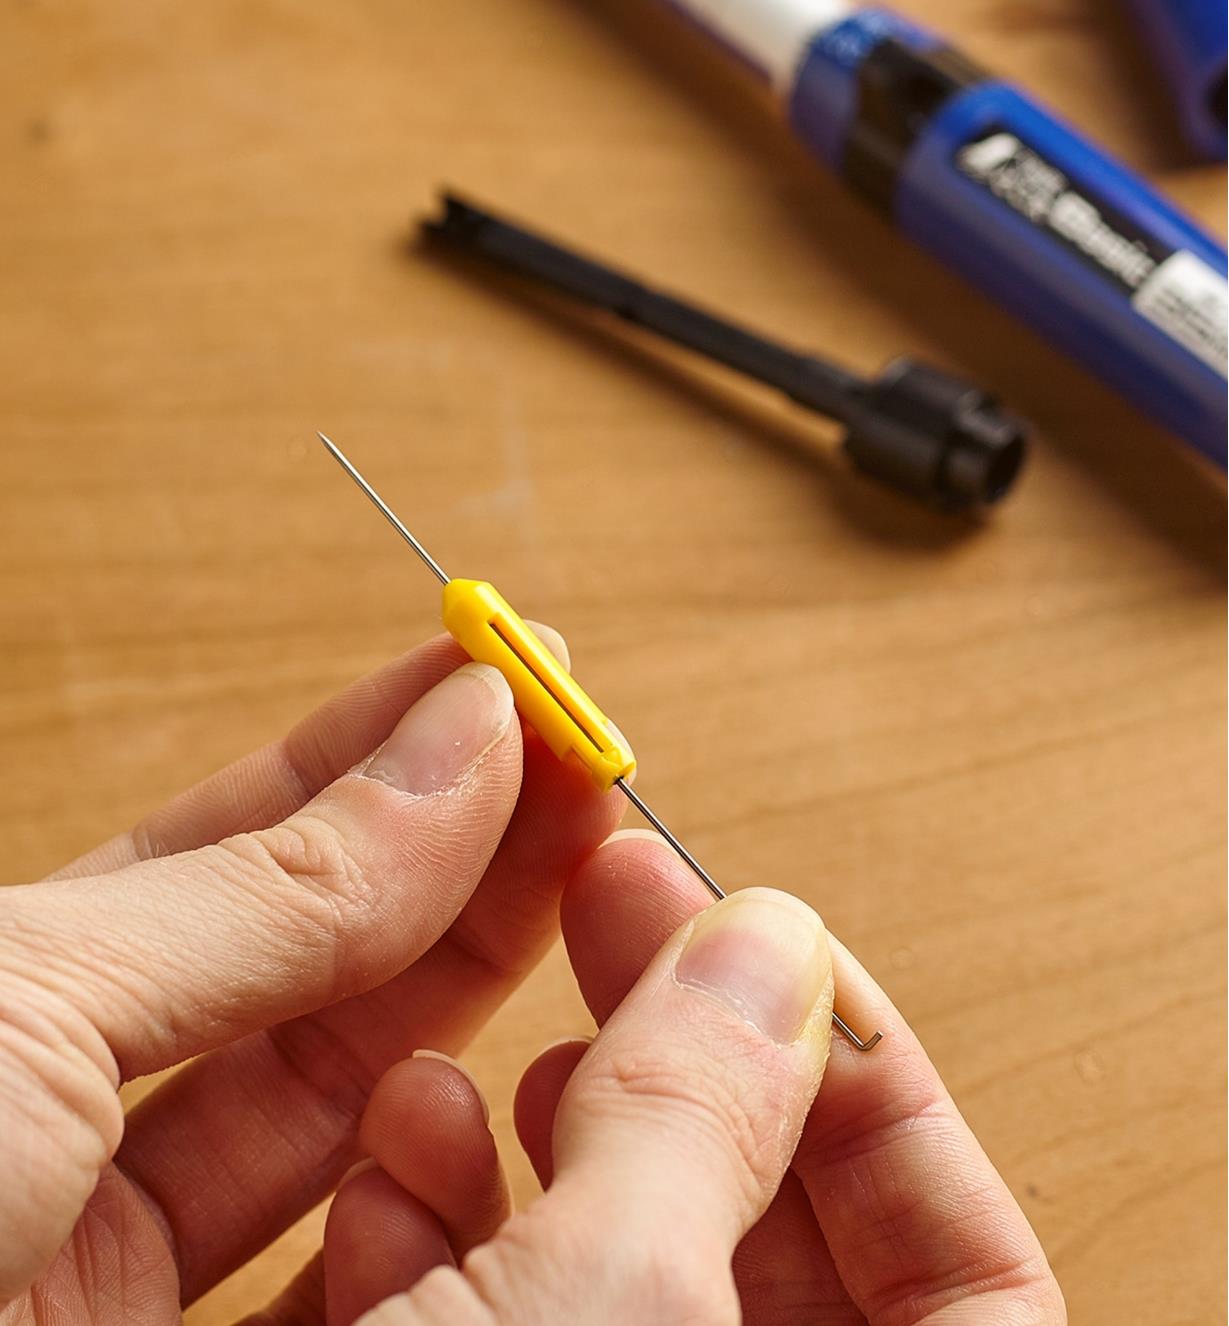 Inserting a needle into a holder